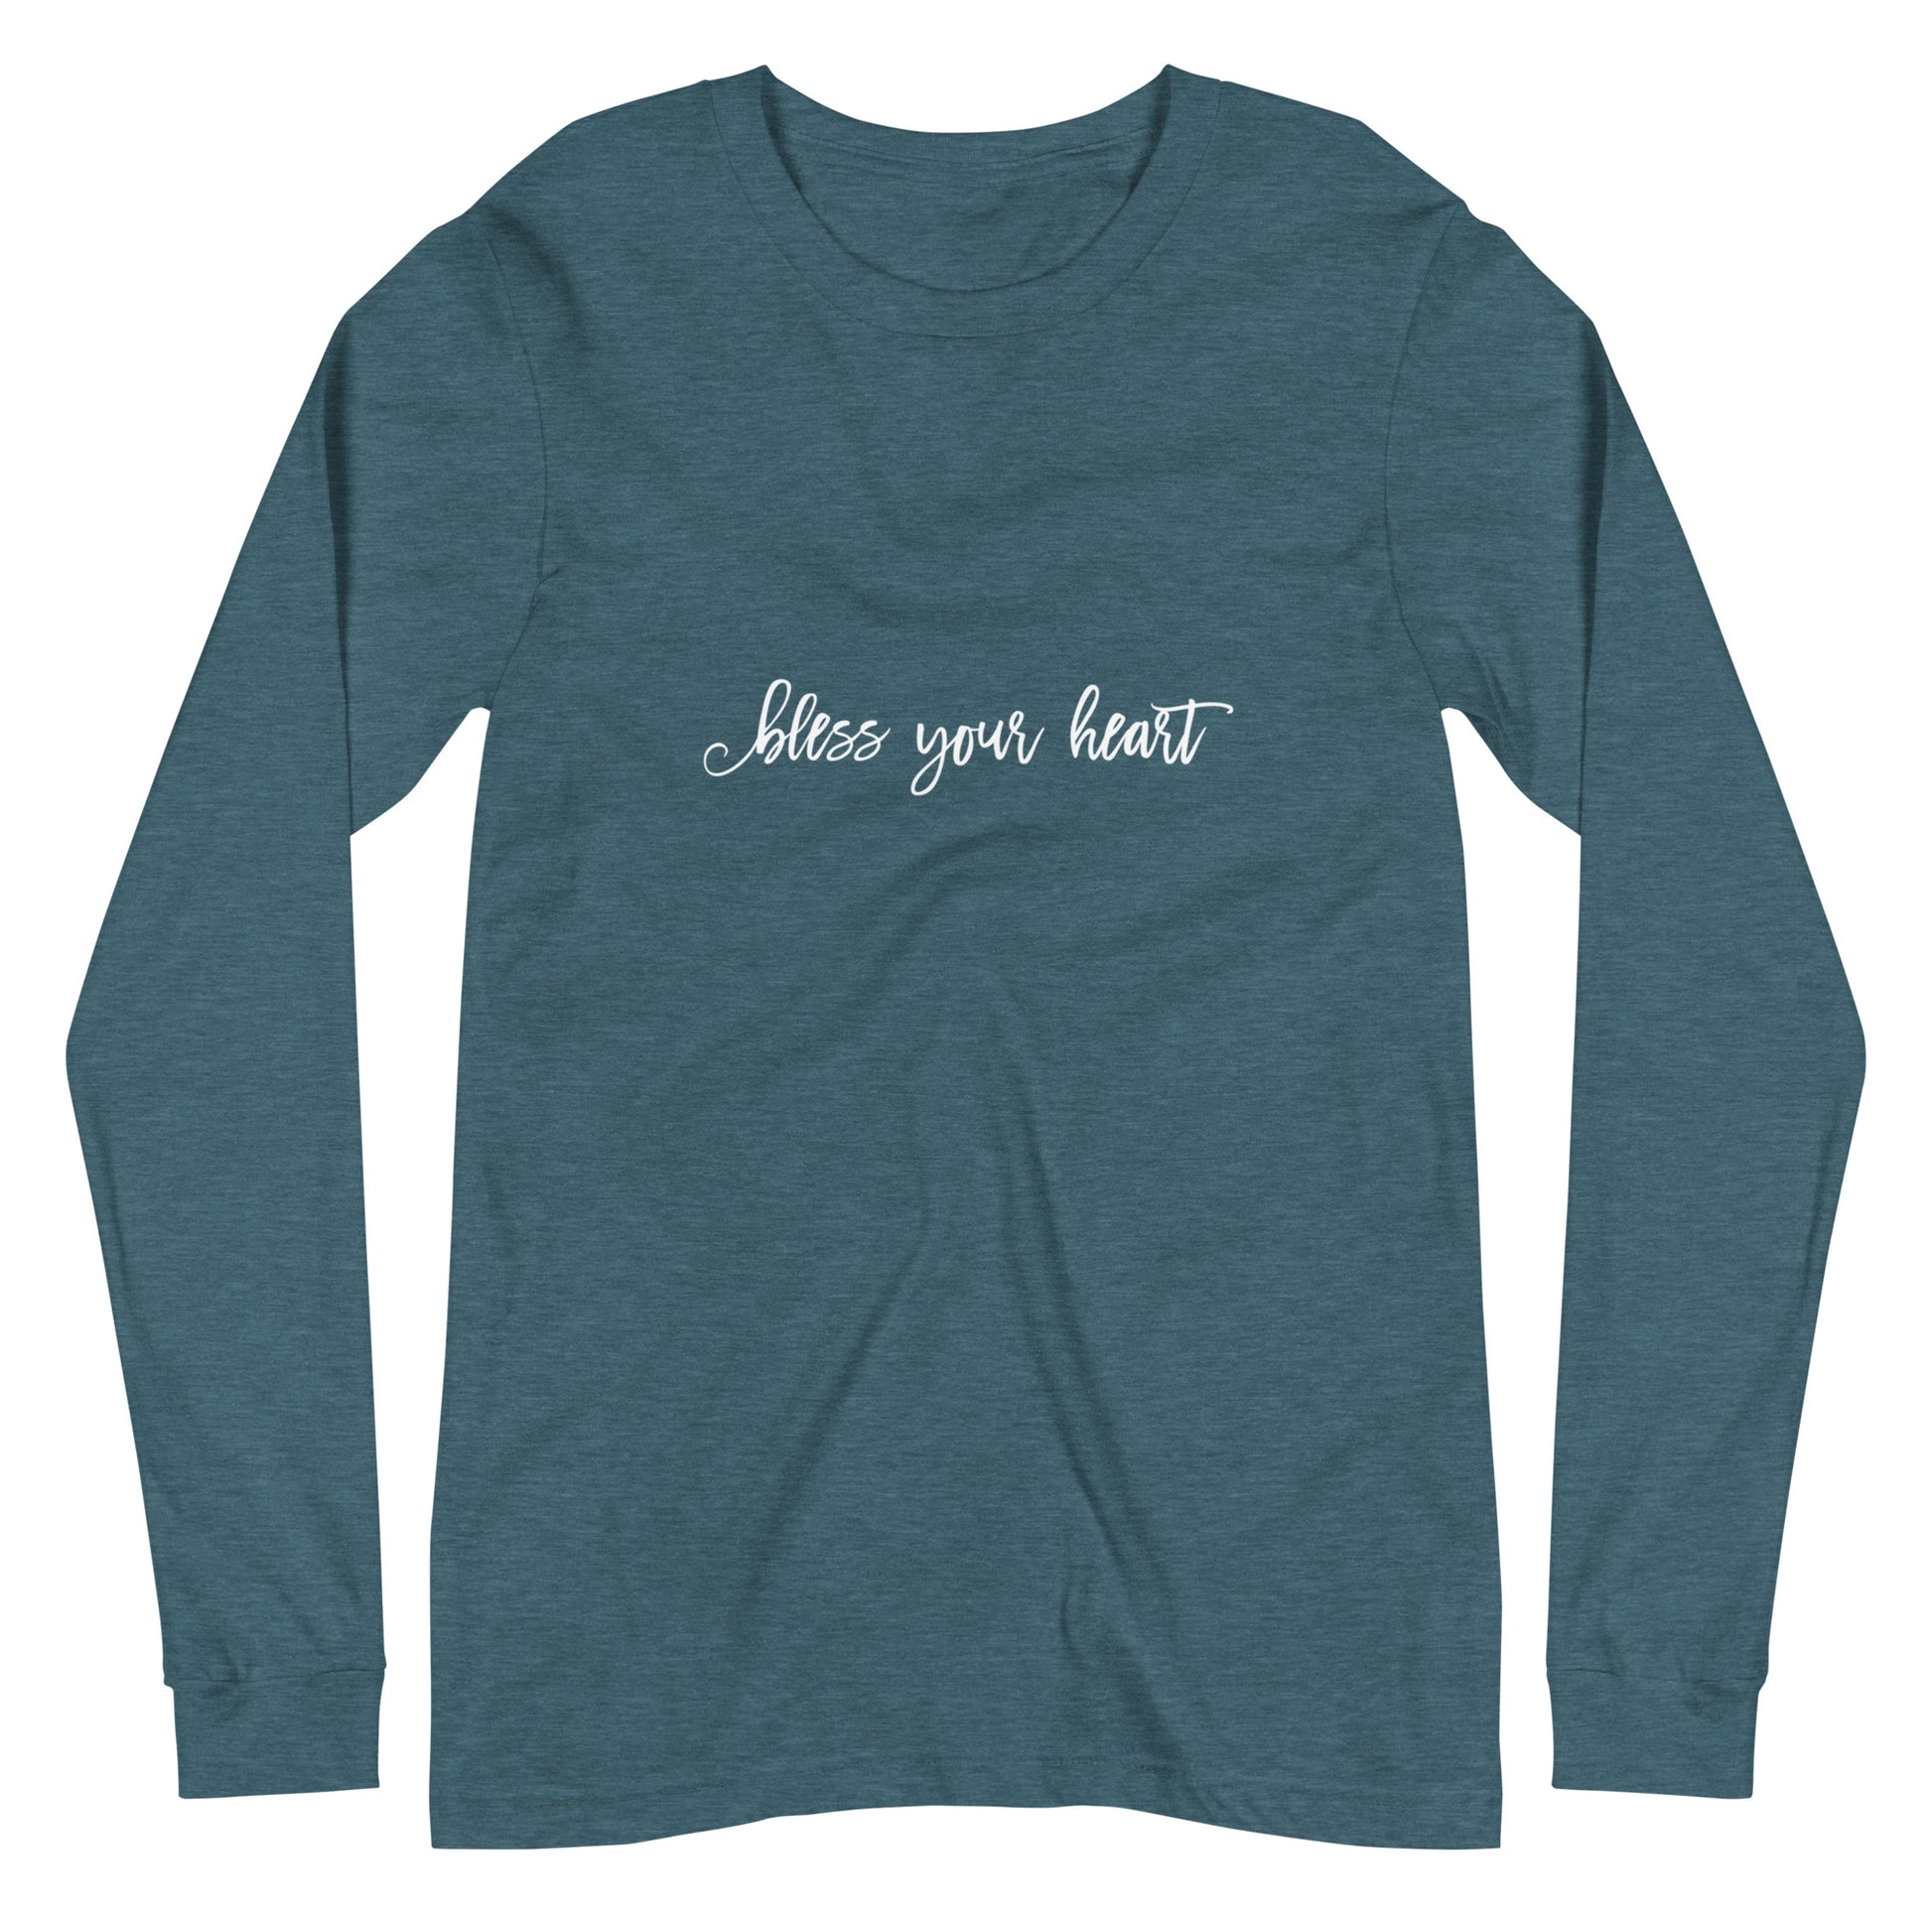 Heather Deep Teal Dark Grey Heather long-sleeve t-shirt with white graphic in an excessively twee font: "bless your heart"